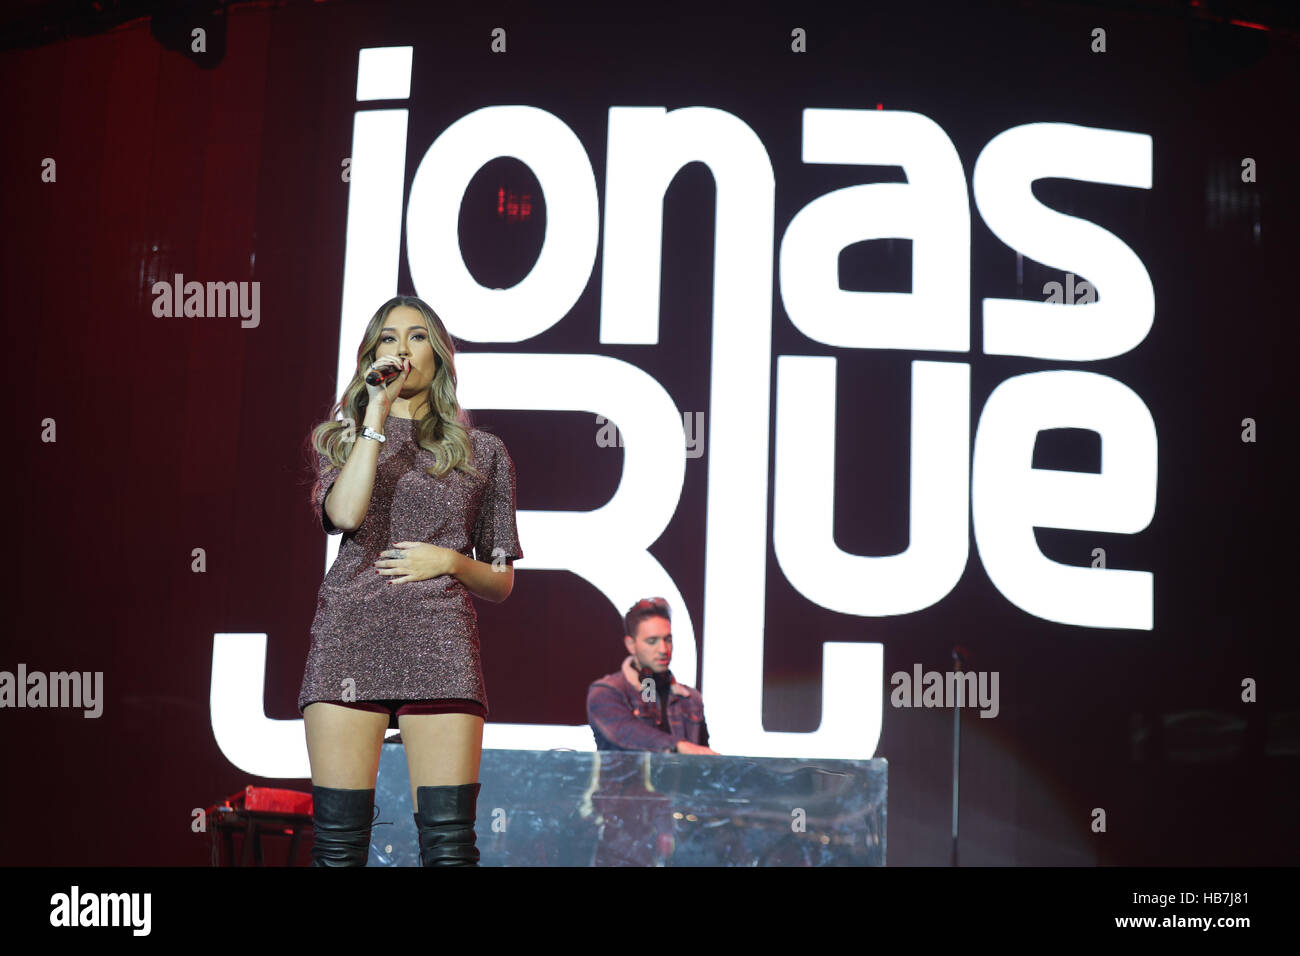 Dakota performs with Jonas Blue on stage at Capital's Jingle Bell Ball with Coca-Cola at London's O2 arena. PRESS ASSOCIATION Photo. Picture date: Sunday 4th December 2016. Photo credit should read: Yui Mok/PA Wire Stock Photo